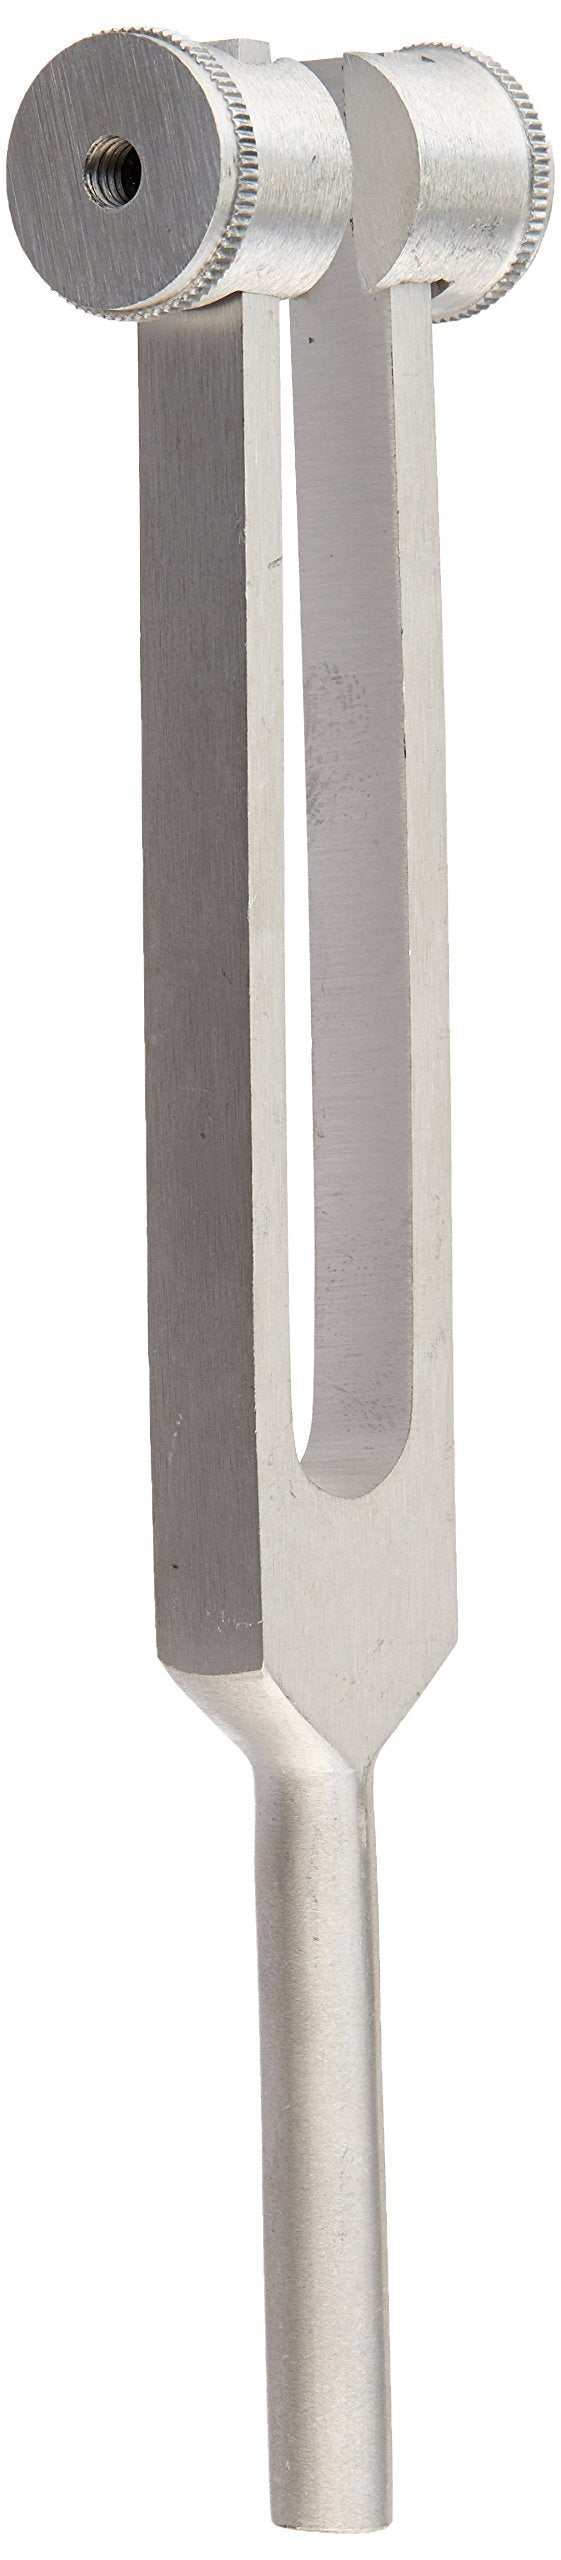 Graham-Field 1315 Tuning Fork, C256 Fixed Weight, Silver, 1¾â€ Long and 3/8â€ Diameter